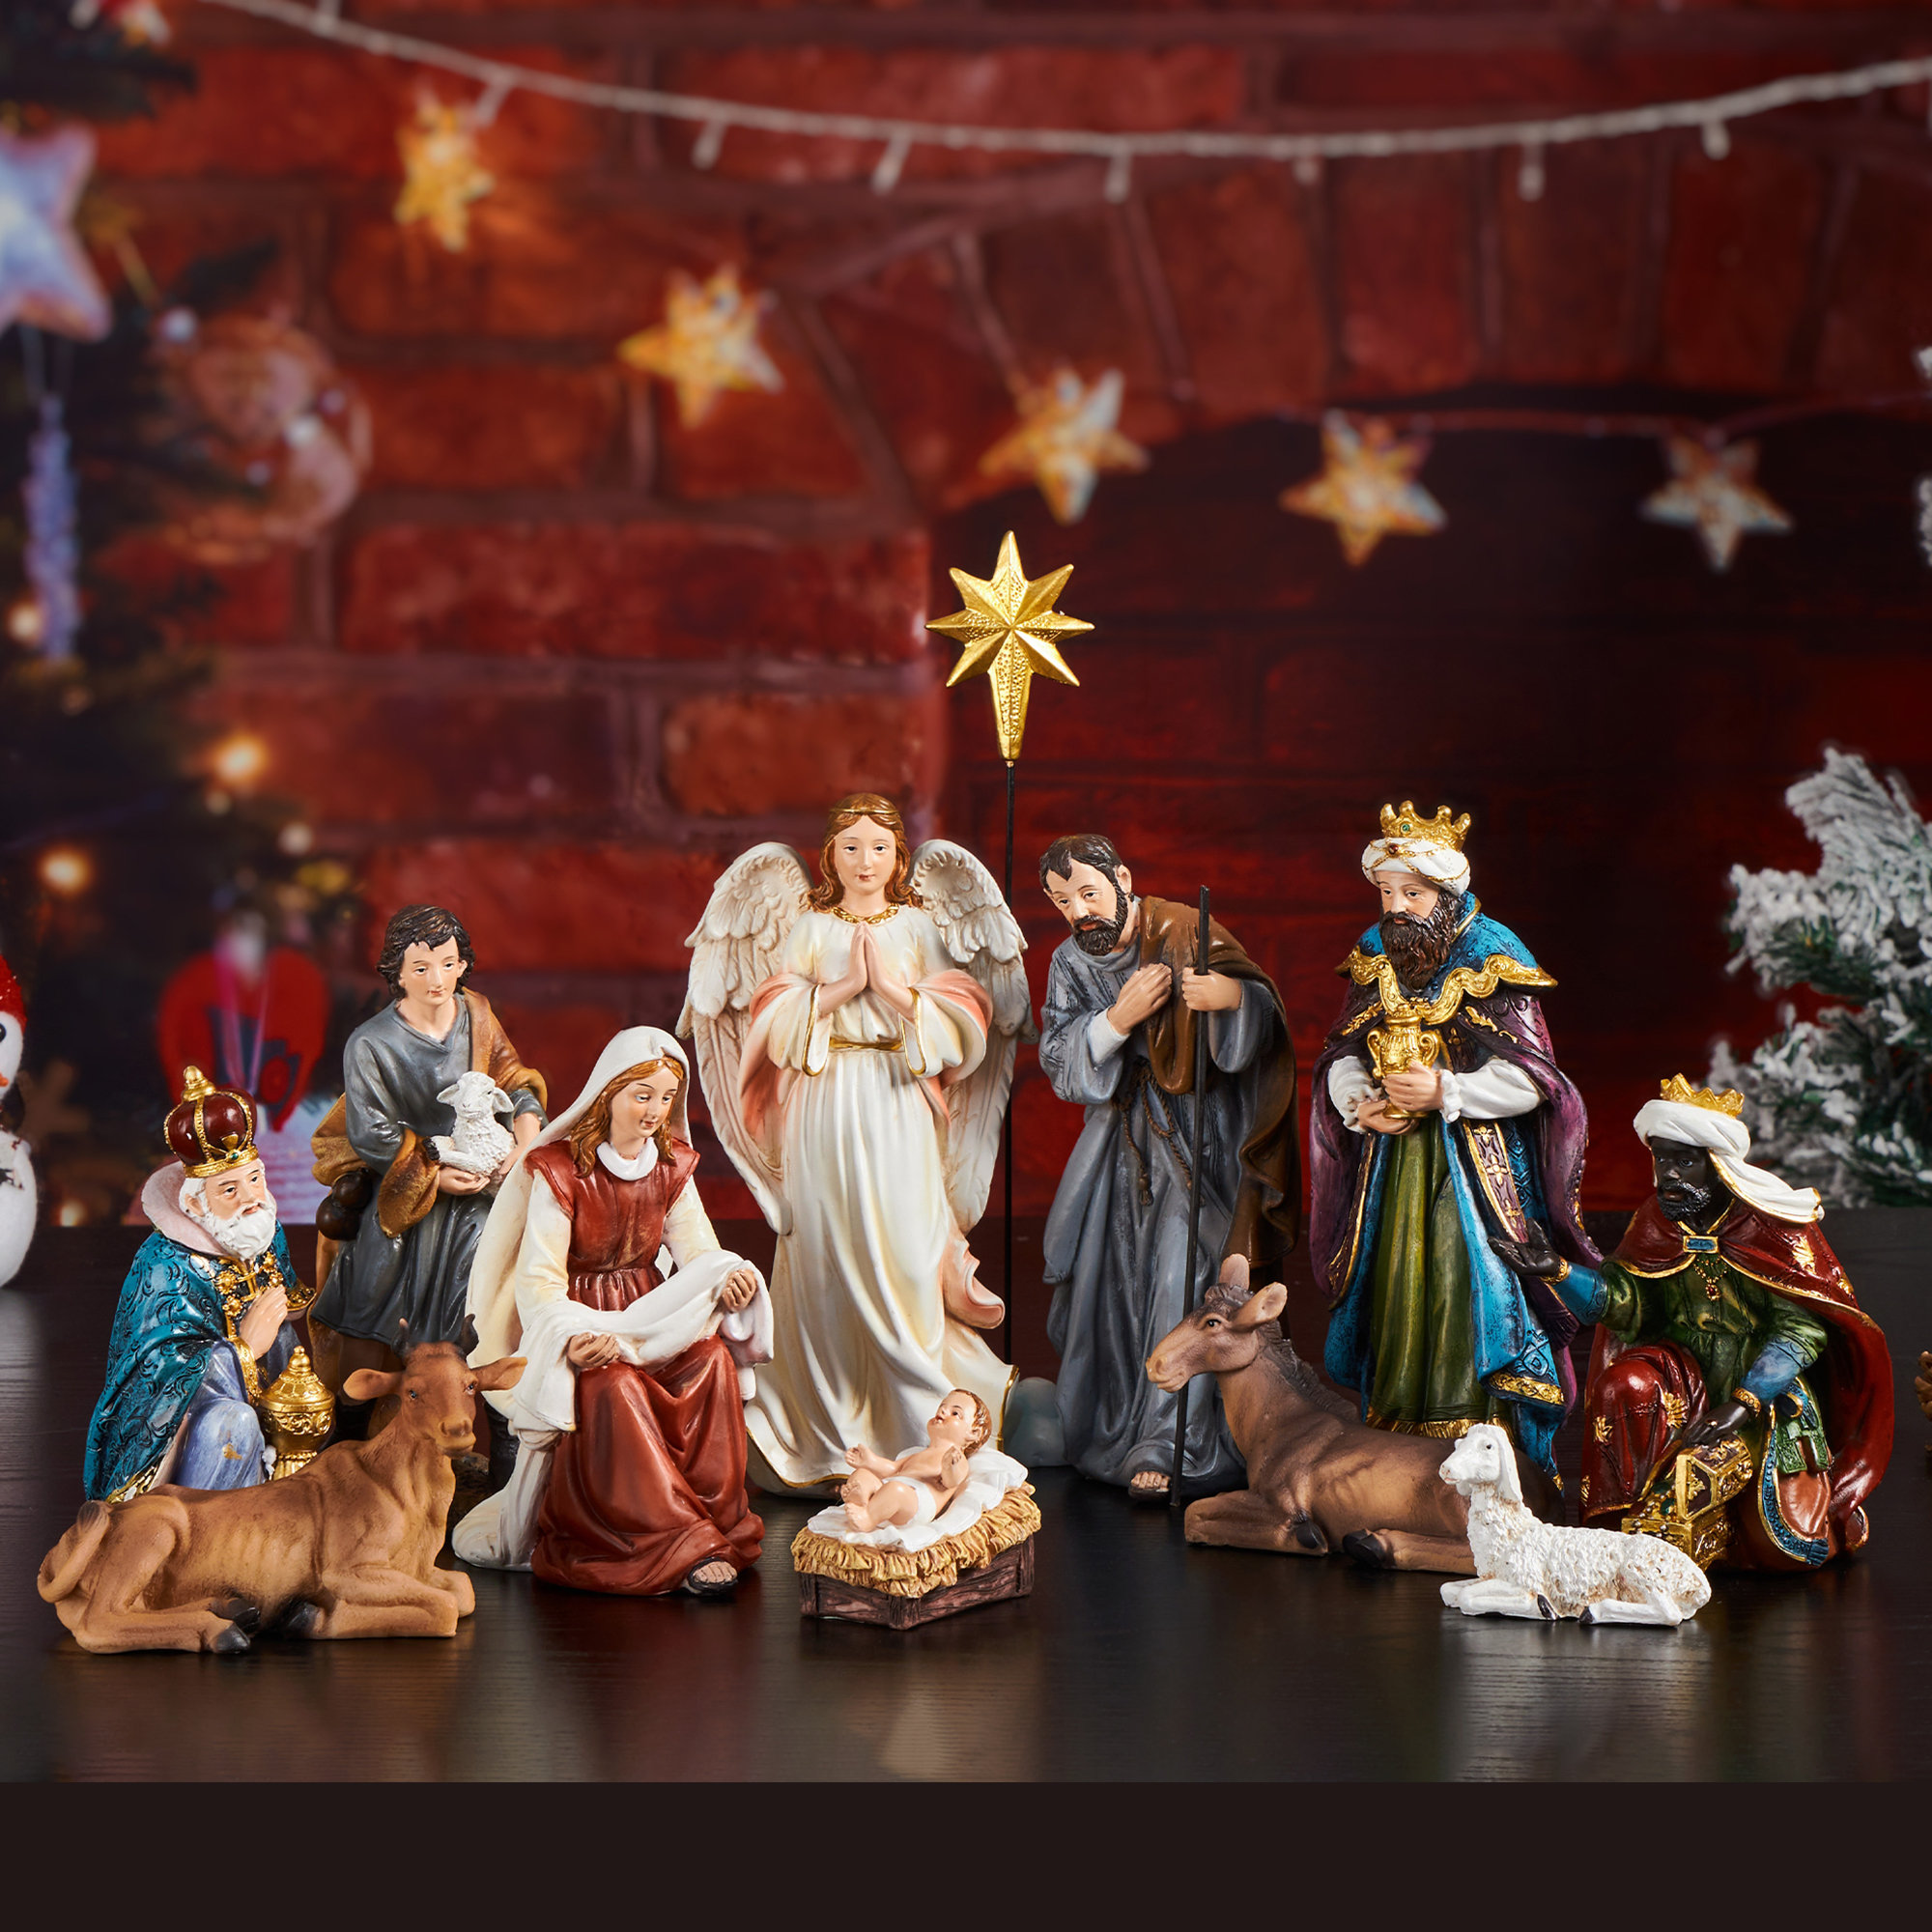 13 Piece Indoor Christmas Nativity Sets Holy Family Religious Decorations Collection Gifts 